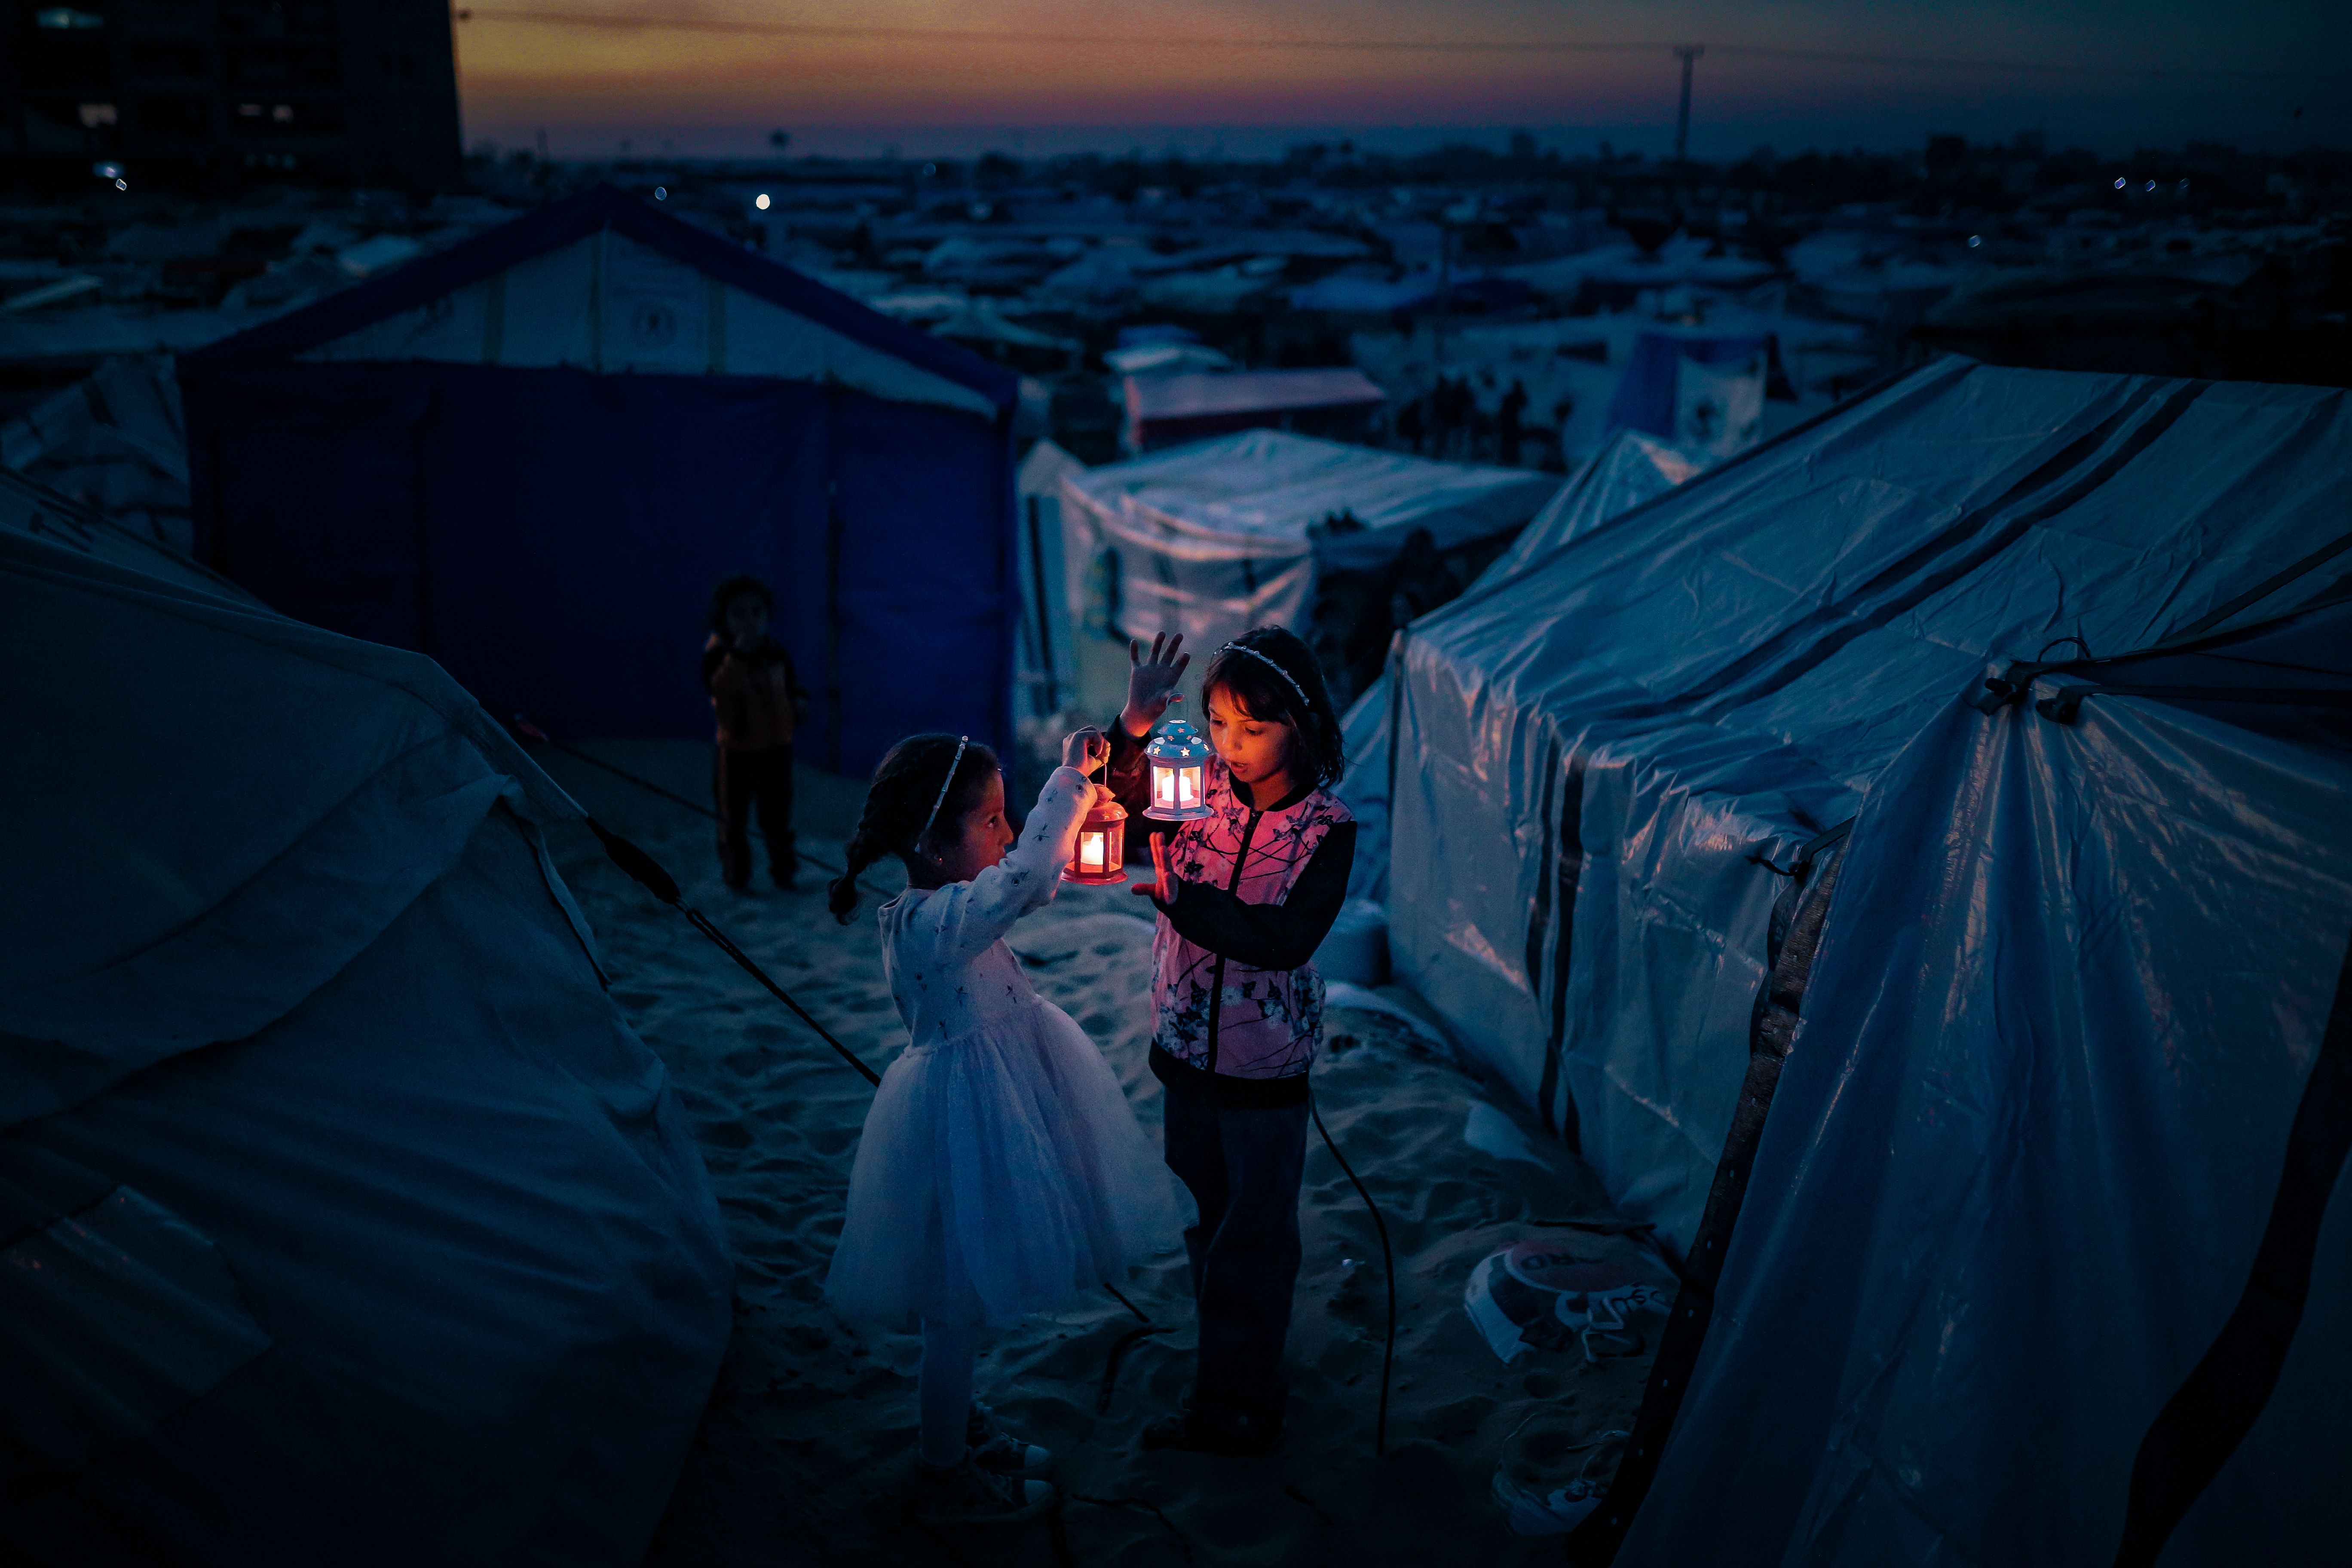 Two Palestinian children in the evening, standing between refugee tents and hold glowing Ramadan lanterns. 